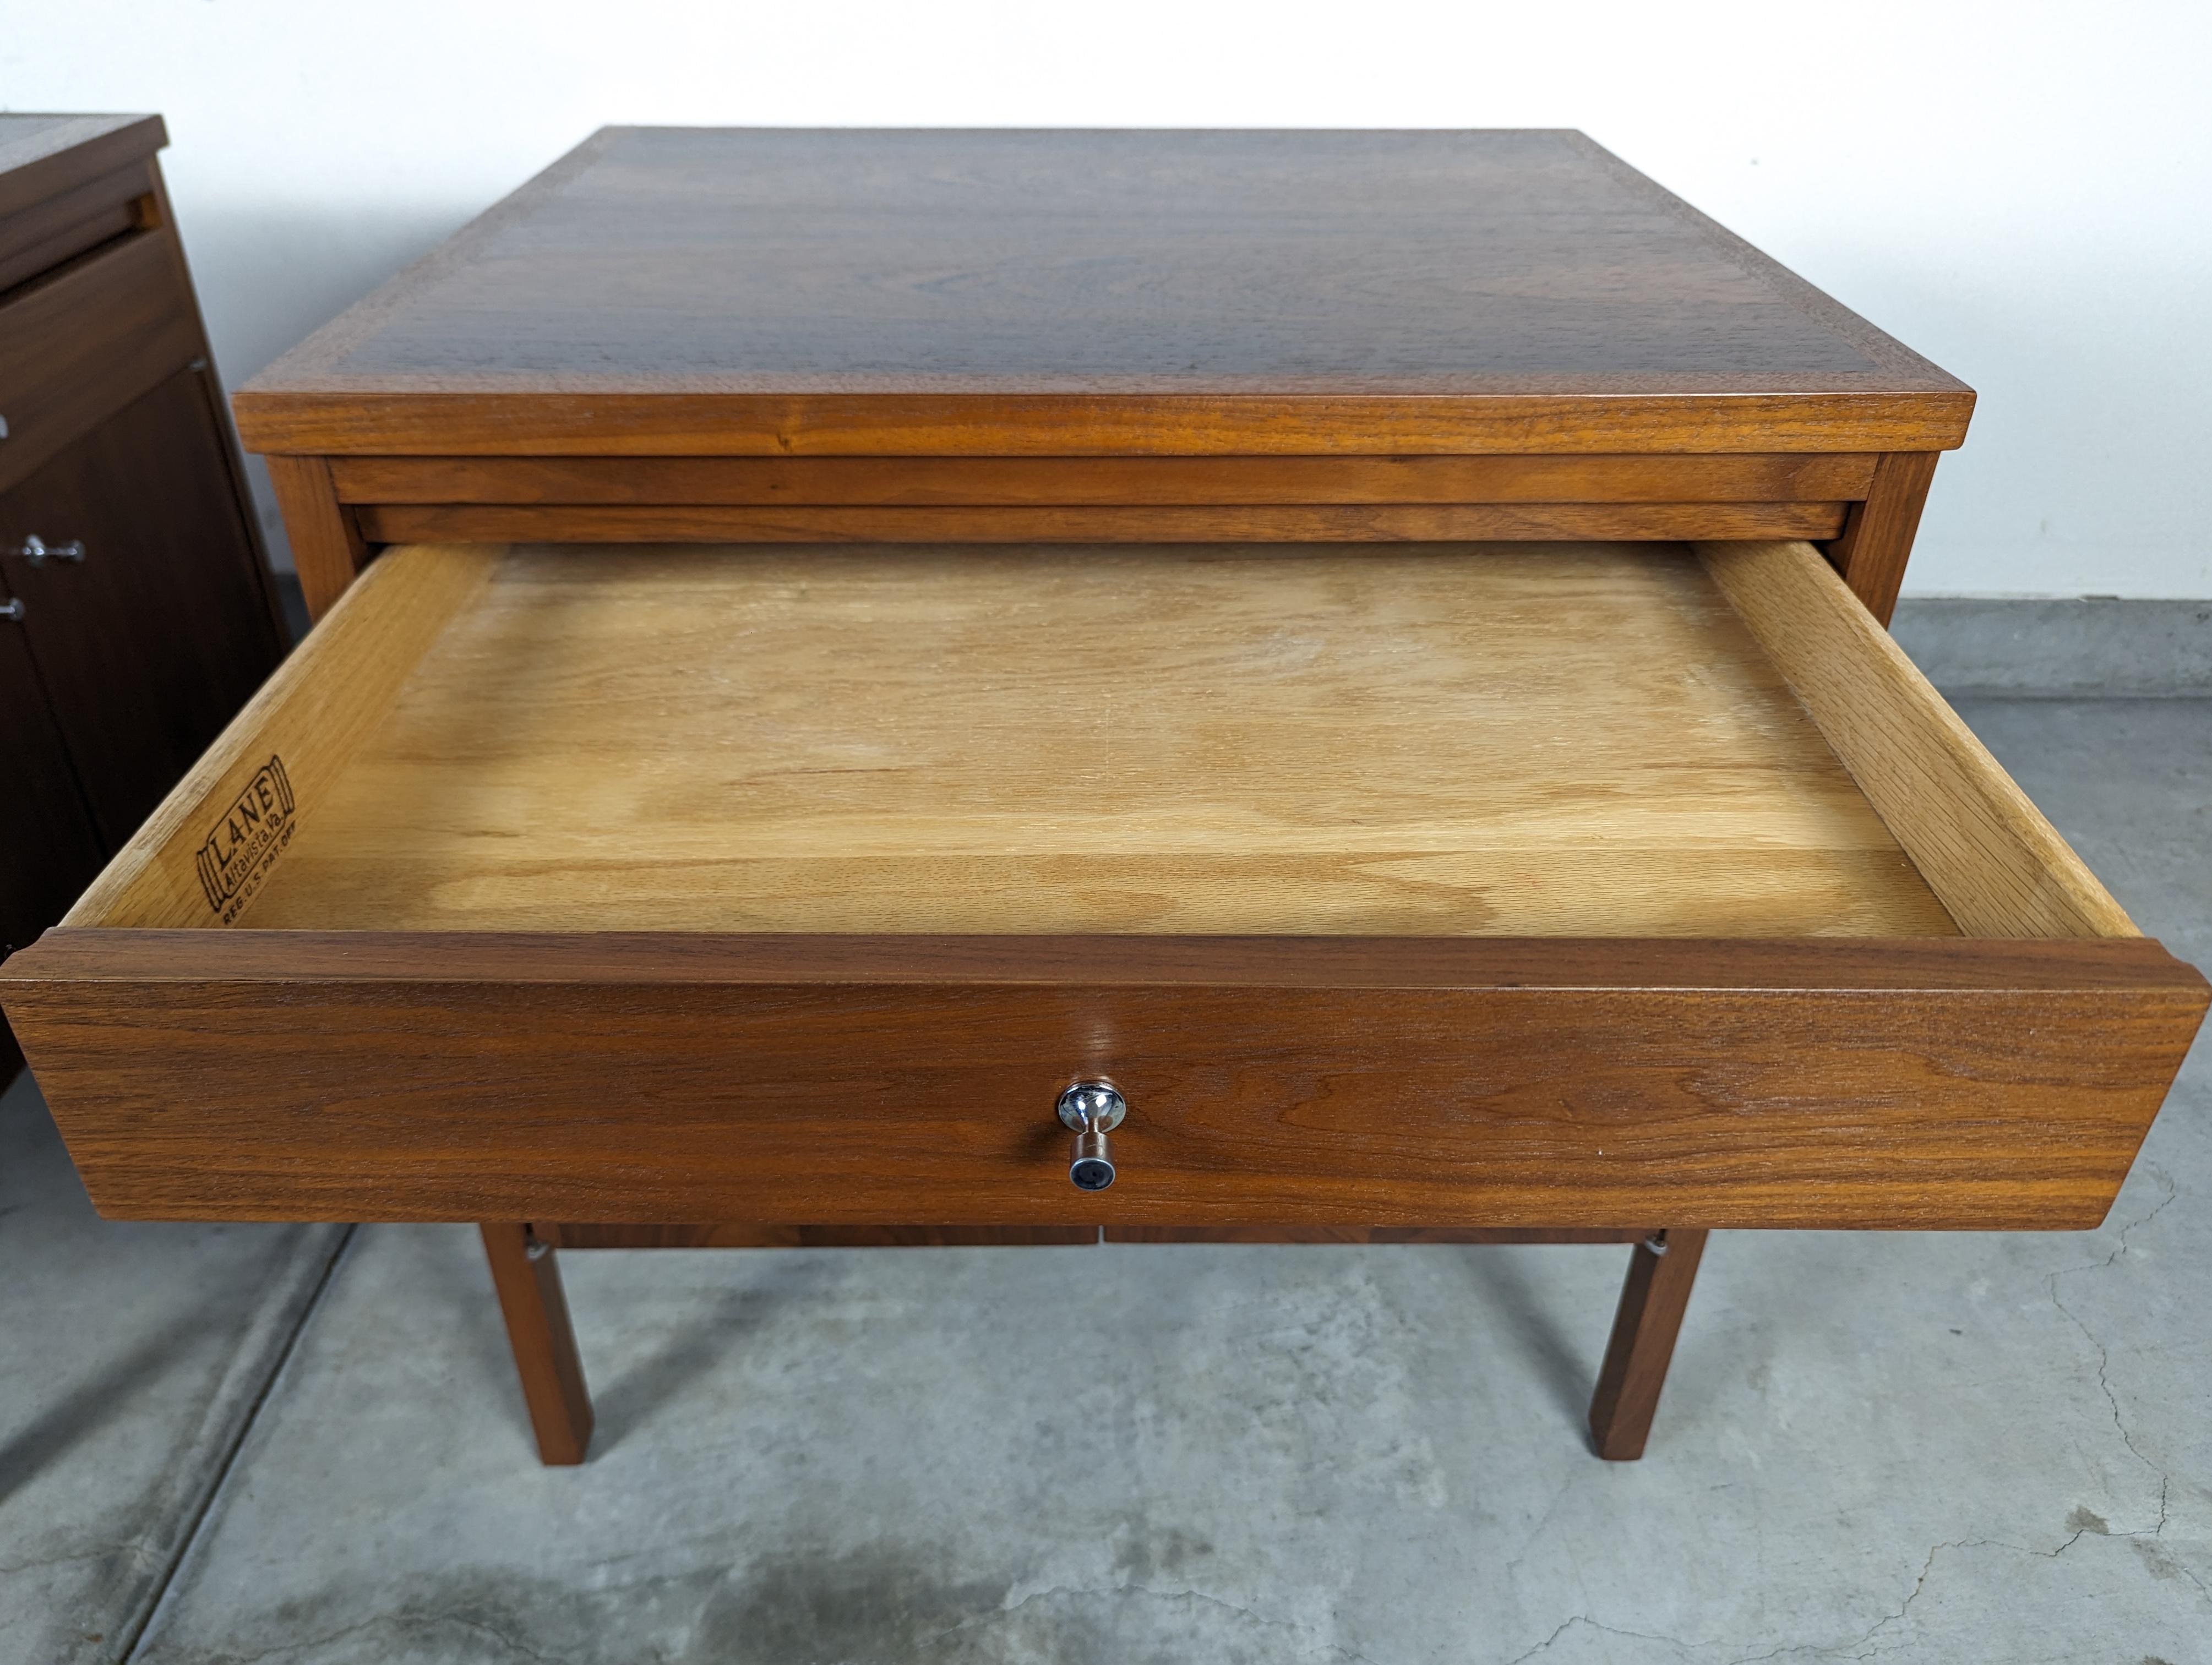 Pair of Mid Century Modern Delineator Nightstands by Paul McCobb for Lane, c1960 For Sale 8